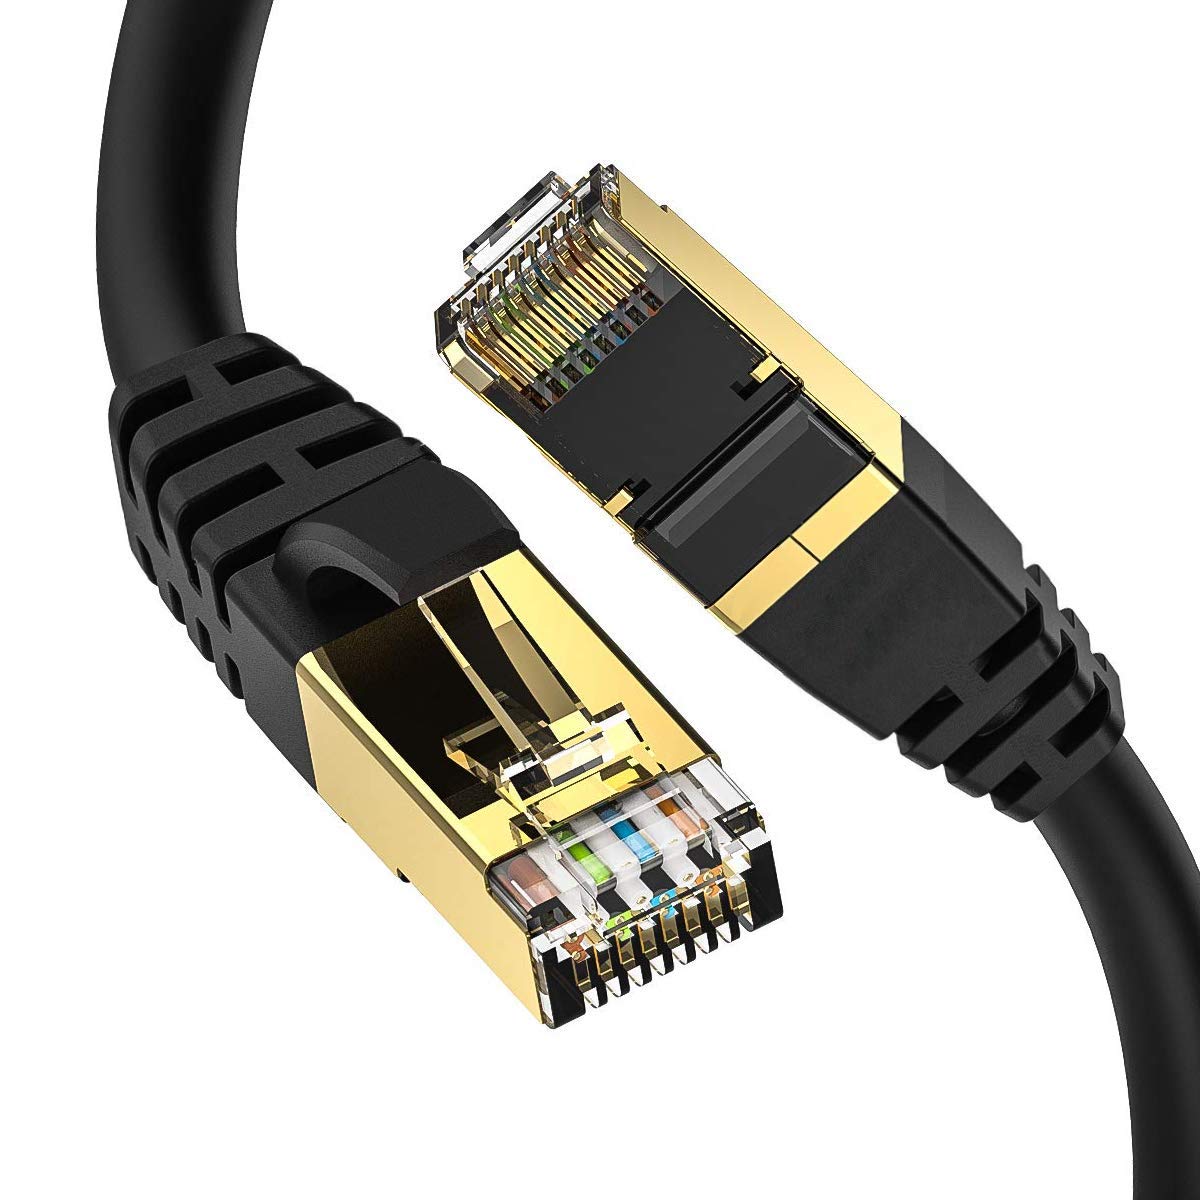 Cat8 Ethernet Cable, Outdoor&Indoor, 6FT Heavy Duty High Speed 26AWG Cat8 LAN Network Cable 40Gbps, 2000Mhz with Gold Plated RJ45 Connector, Weatherproof S/FTP UV Resistant $4.49